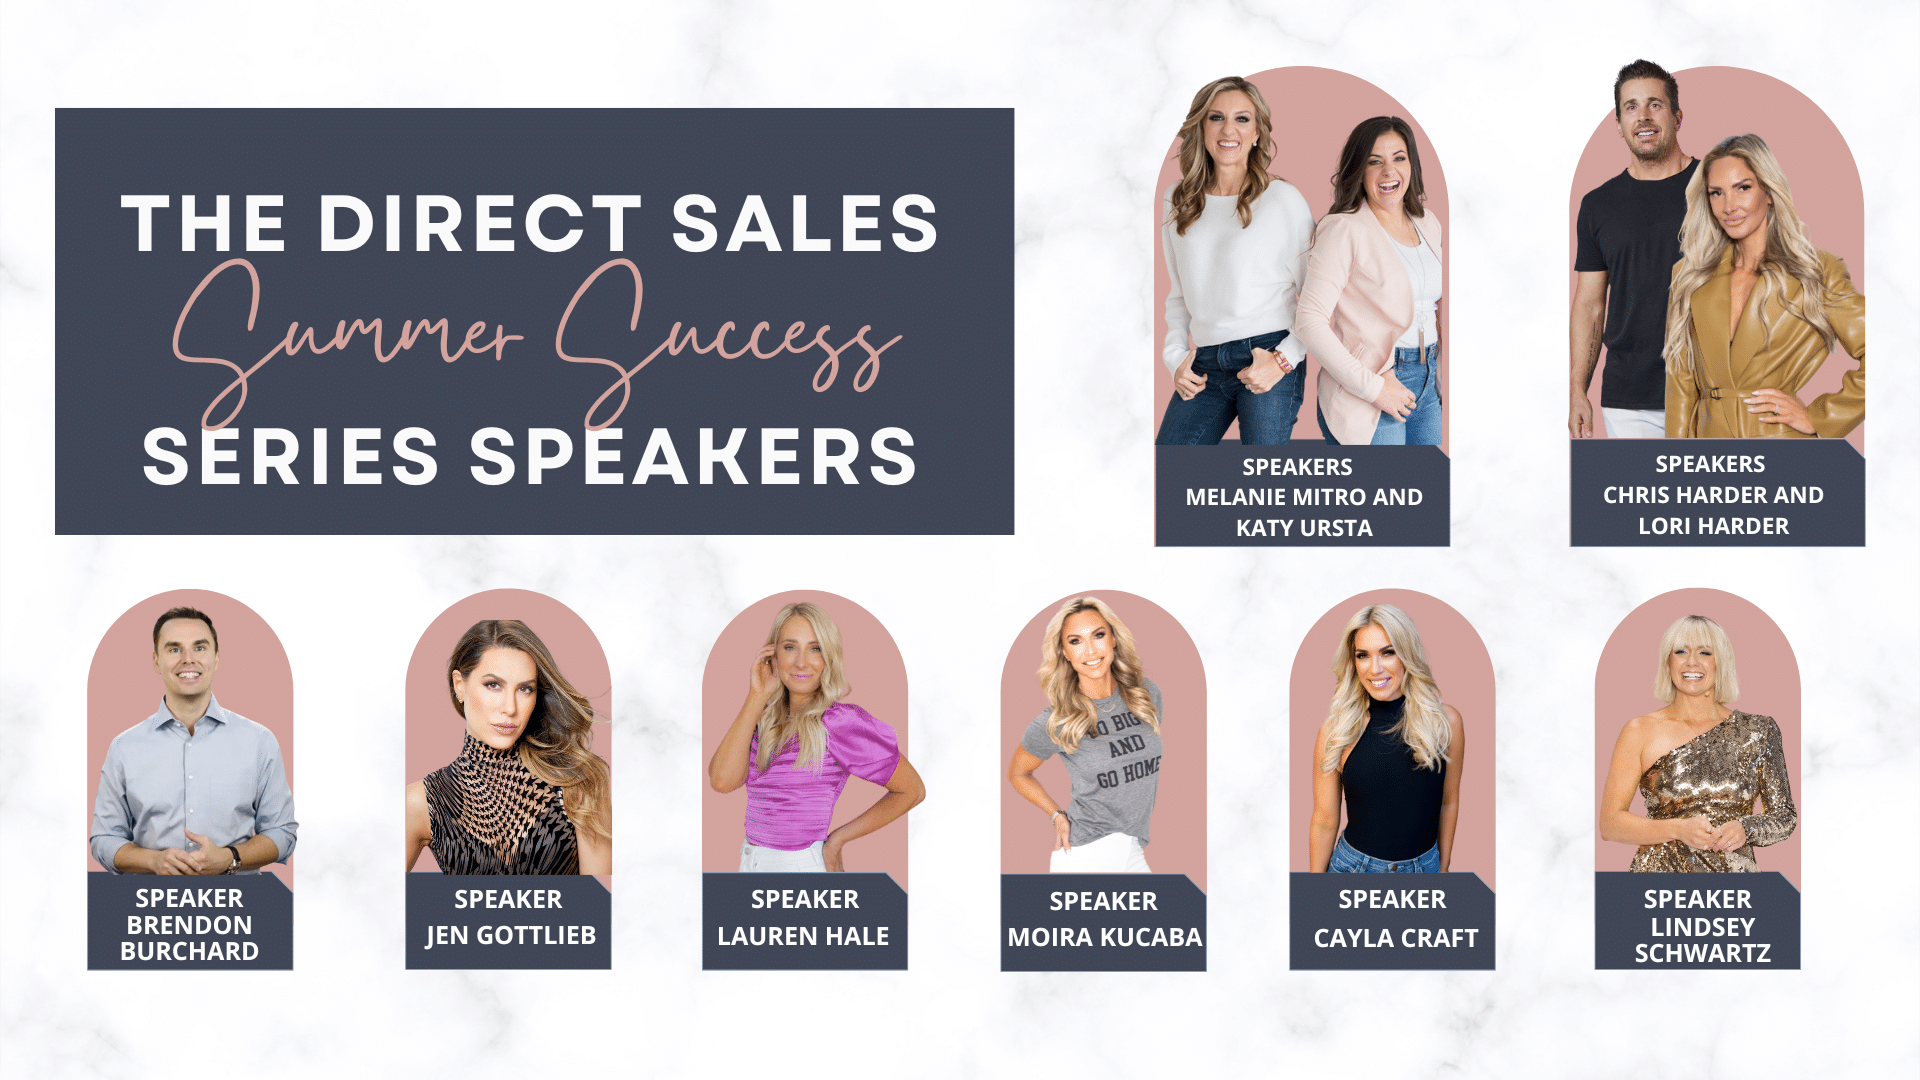 A FREE One-Day Virtual Event for direct sellers who want to get inspired, gain clarity, and learn simple strategies to make this a summer of monumental growth and success.